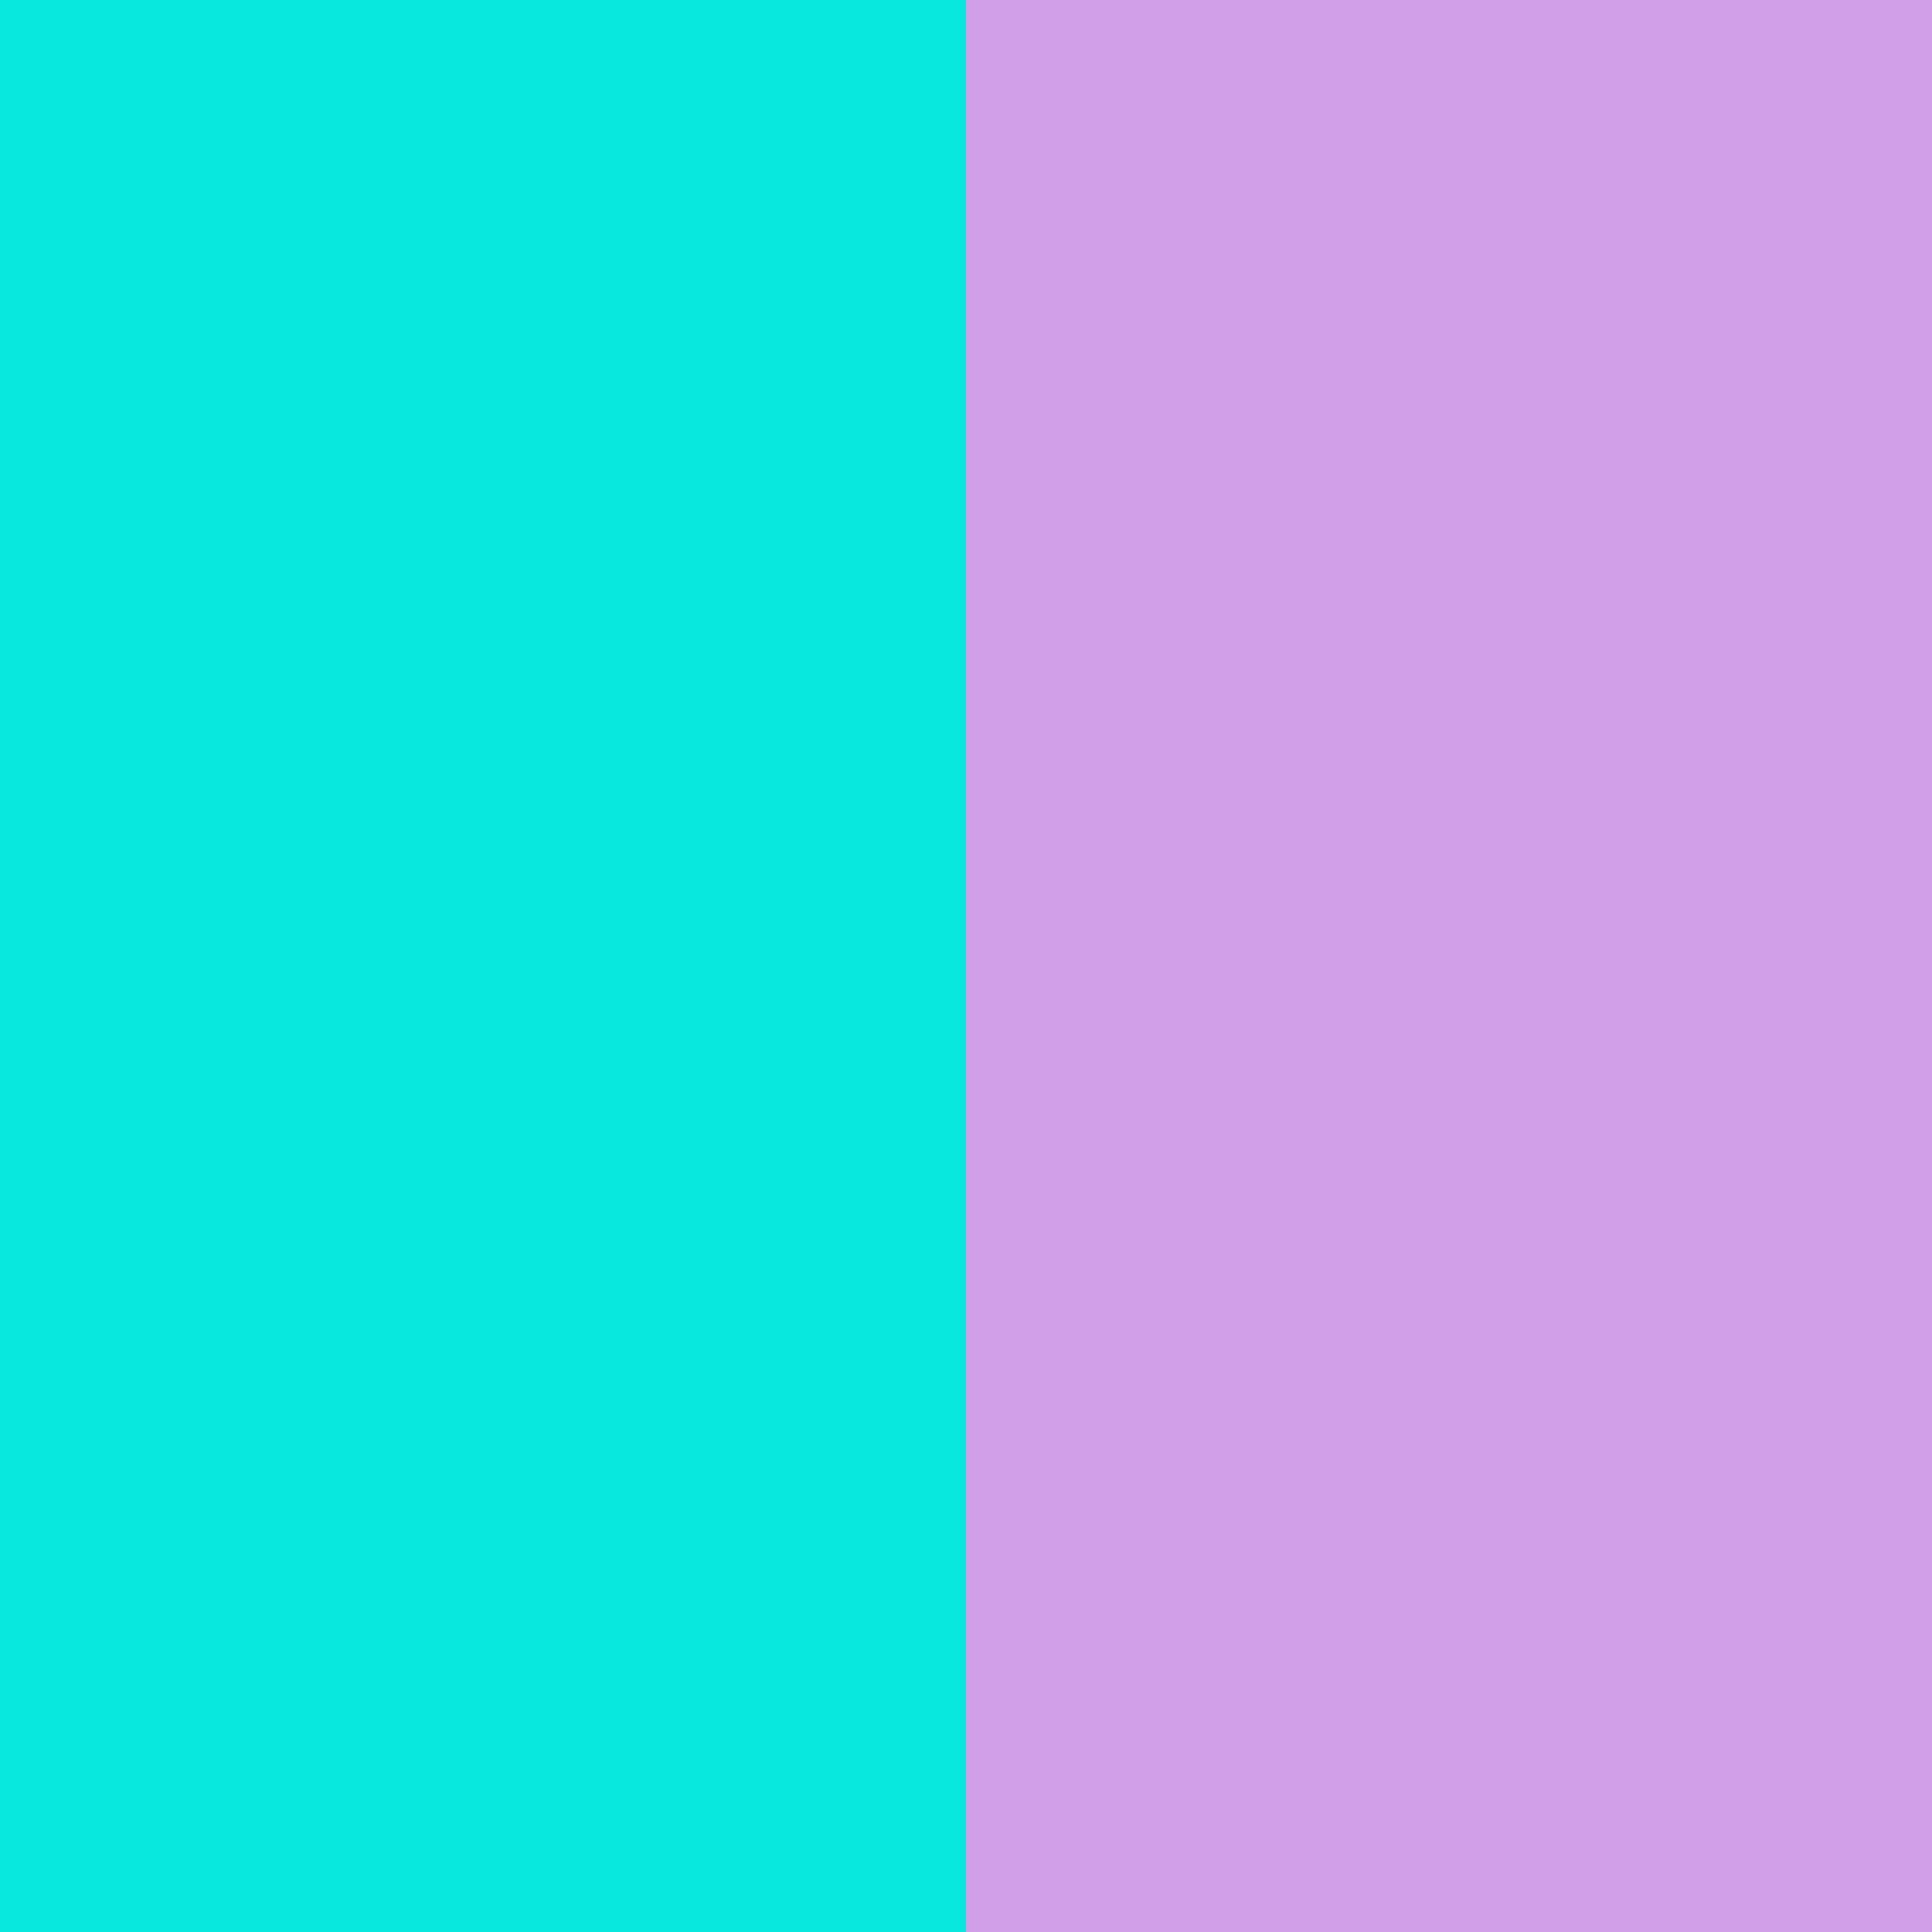 2048x2048-bright-turquoise-bright-ube-two-color-background.jpg